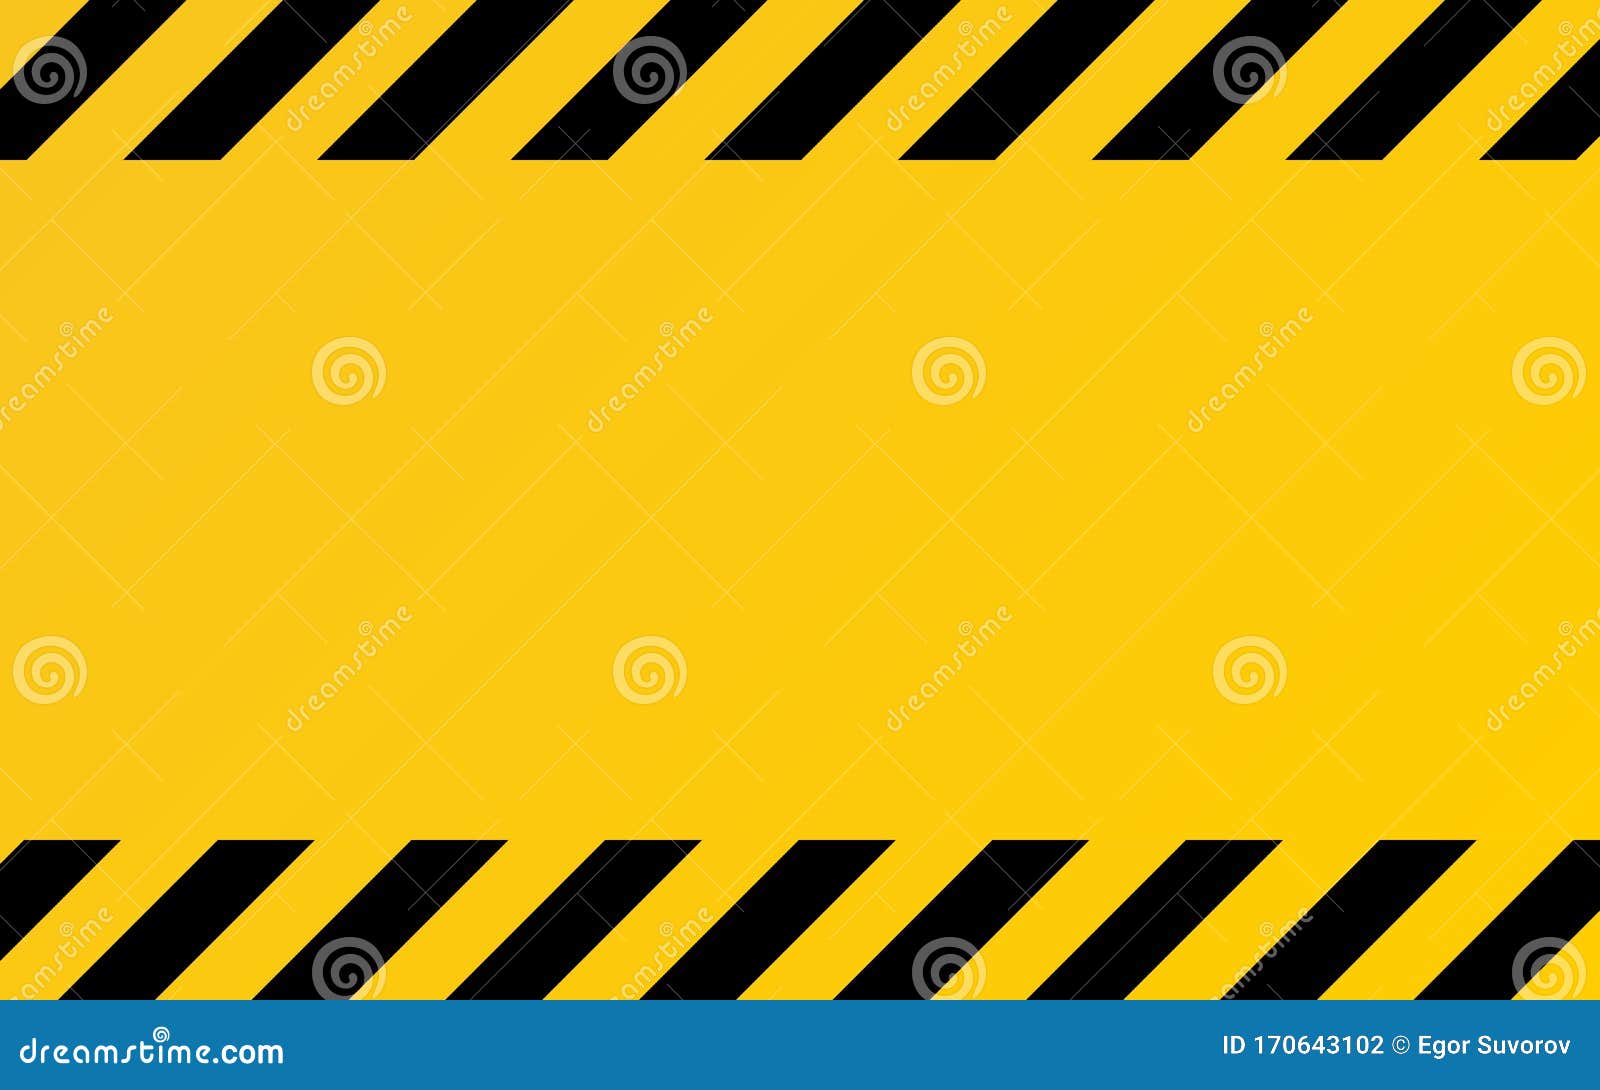 hazard texture. yellow and black diagonal stripes. caution or warning template. construction border template. attention